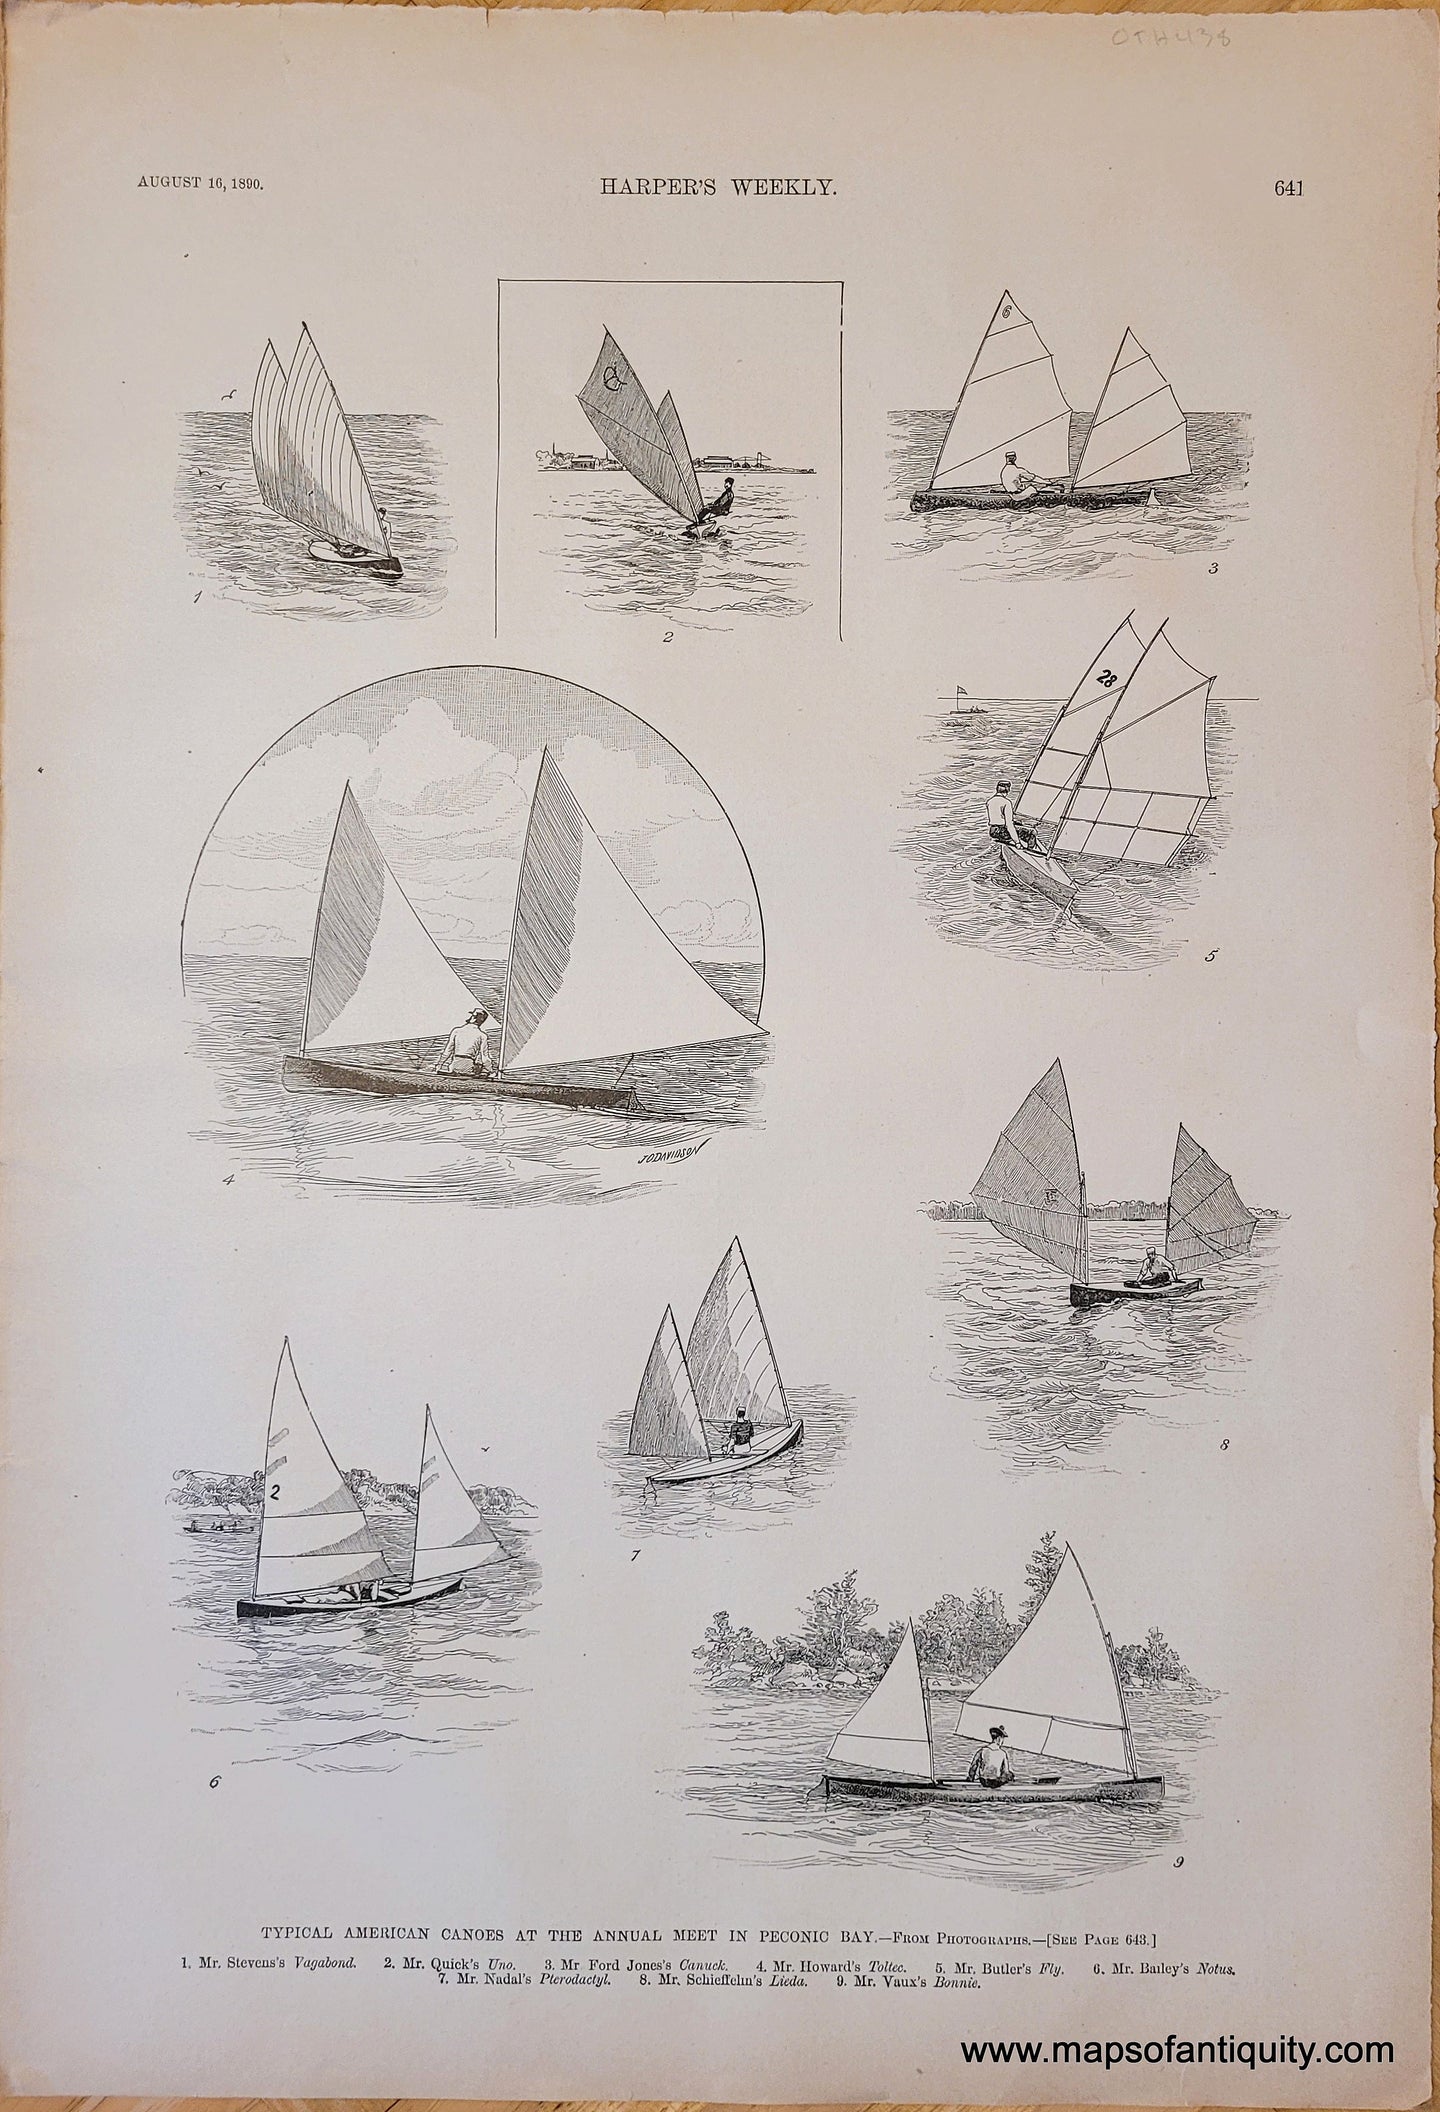 Genuine-Antique-Print-Typical-American-Canoes-at-the-Annual-Meet-in-Peconic-Bay-Antique-Prints-Ship-Prints-1890-Harpers-Weekly-Maps-Of-Antiquity-1800s-19th-century